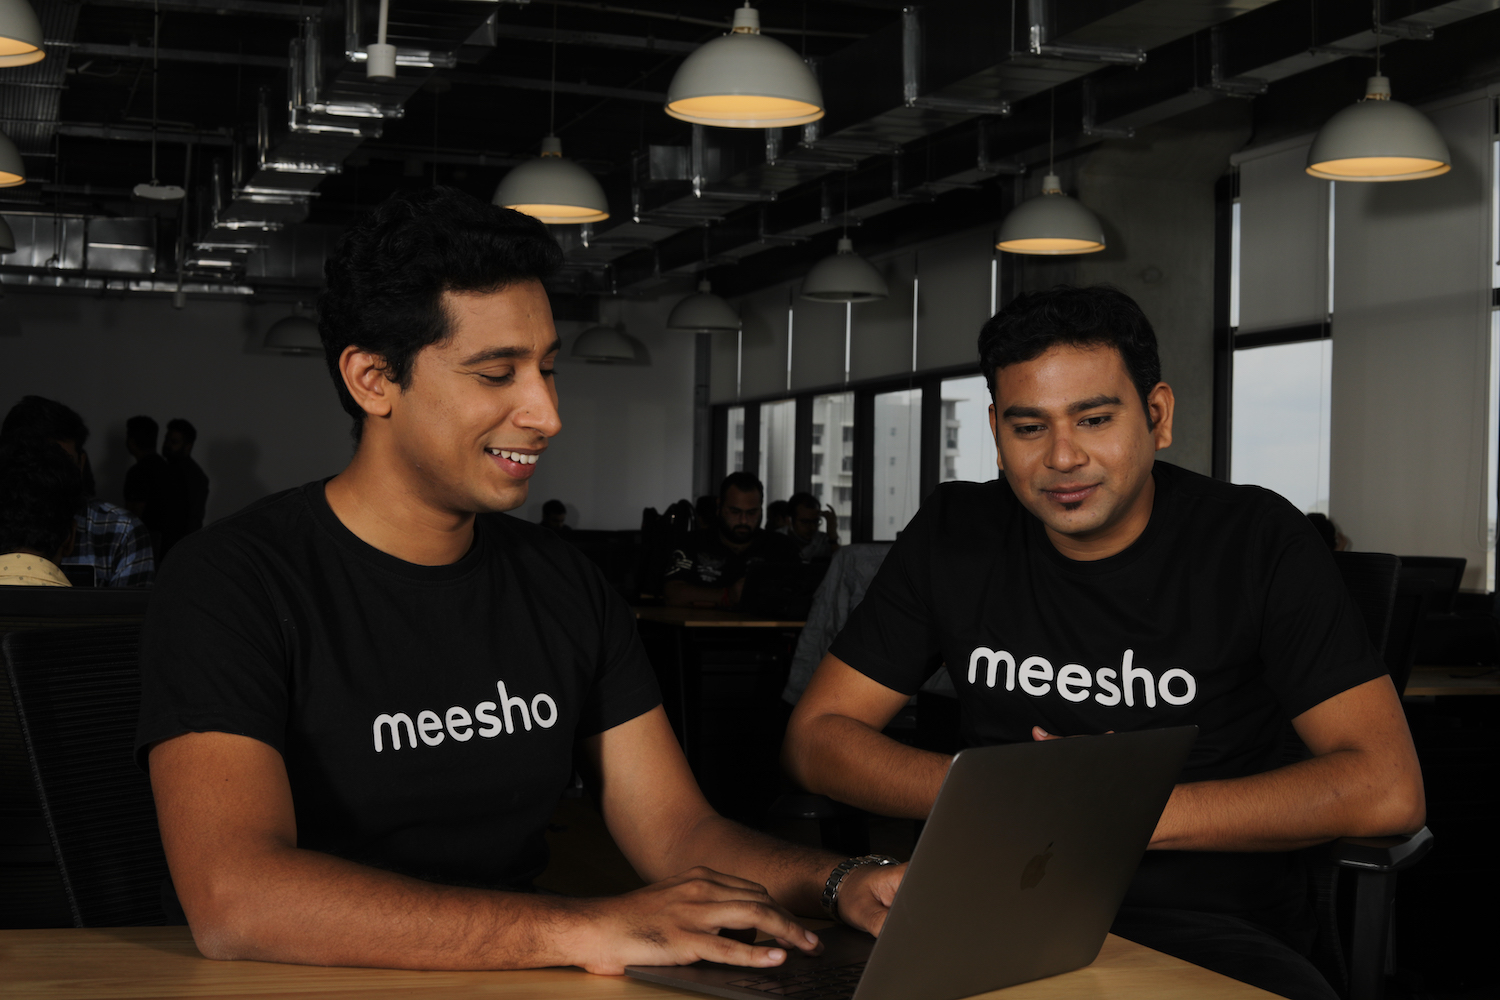 India's Meesho cuts 251 jobs to 'accelerate timeline to profitability' | TechCrunch